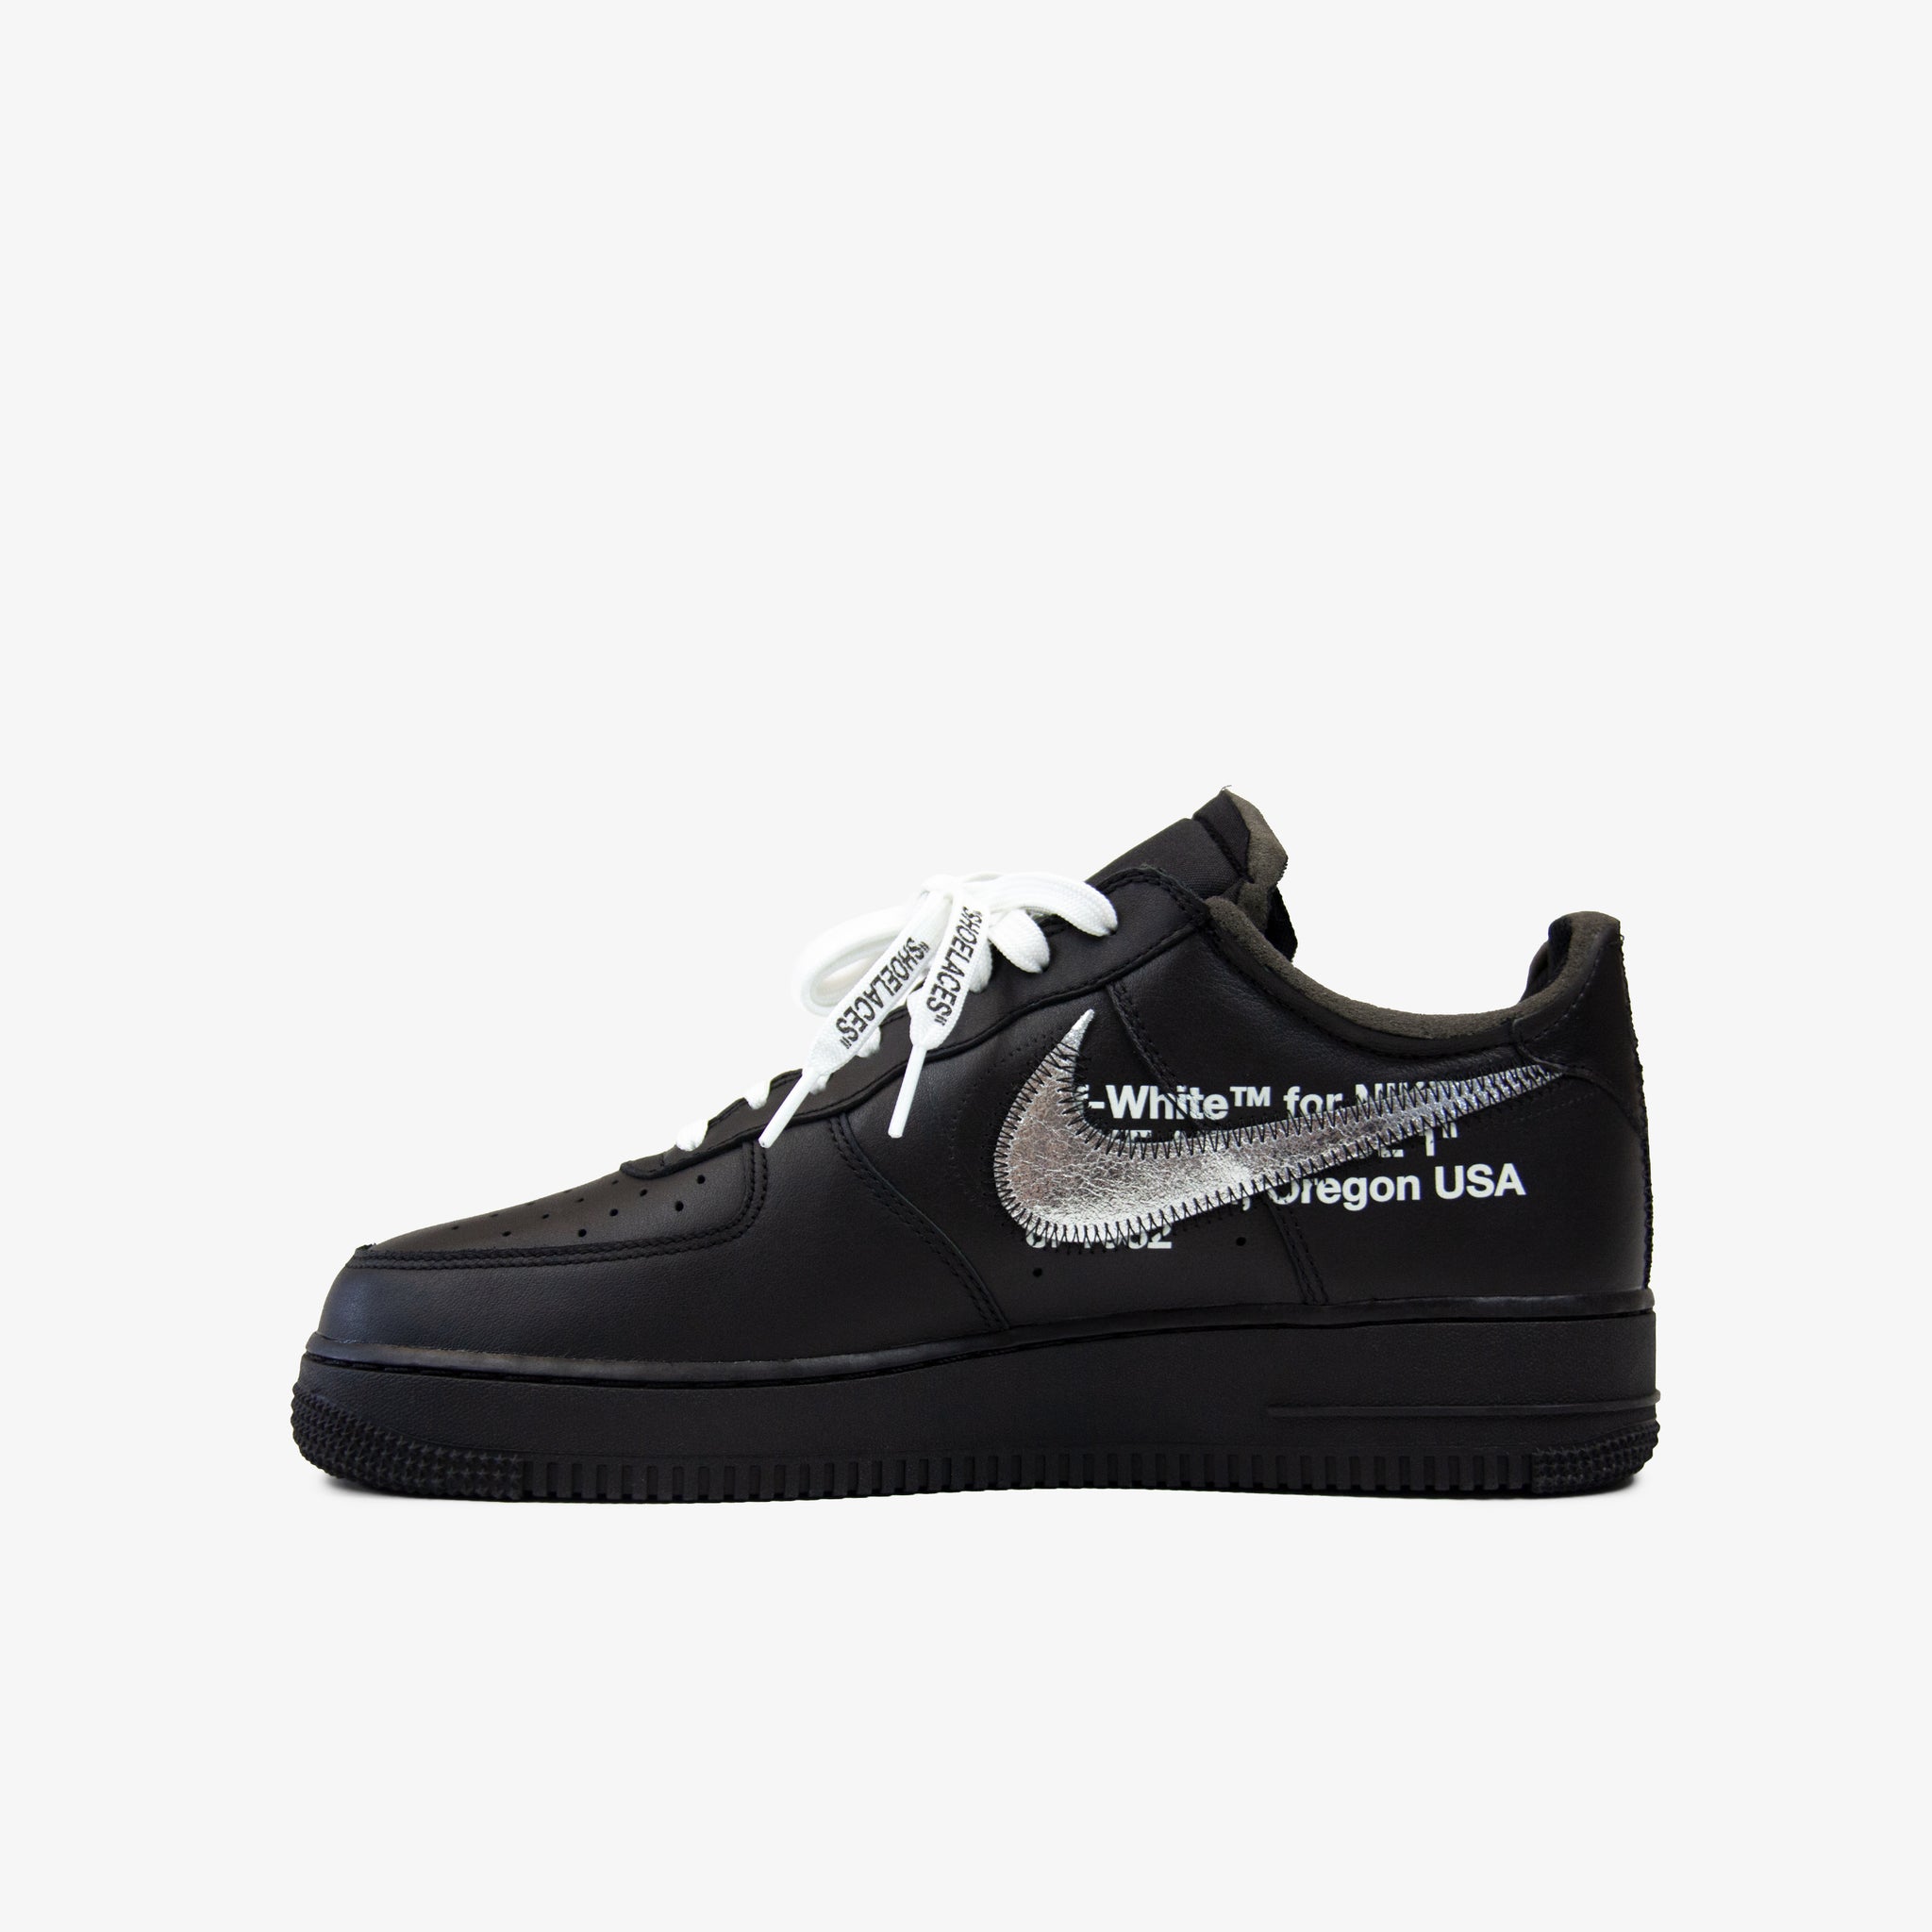 OFF-WHITE NIKE AIR FORCE 1 '07 MOMA – OBTAIND